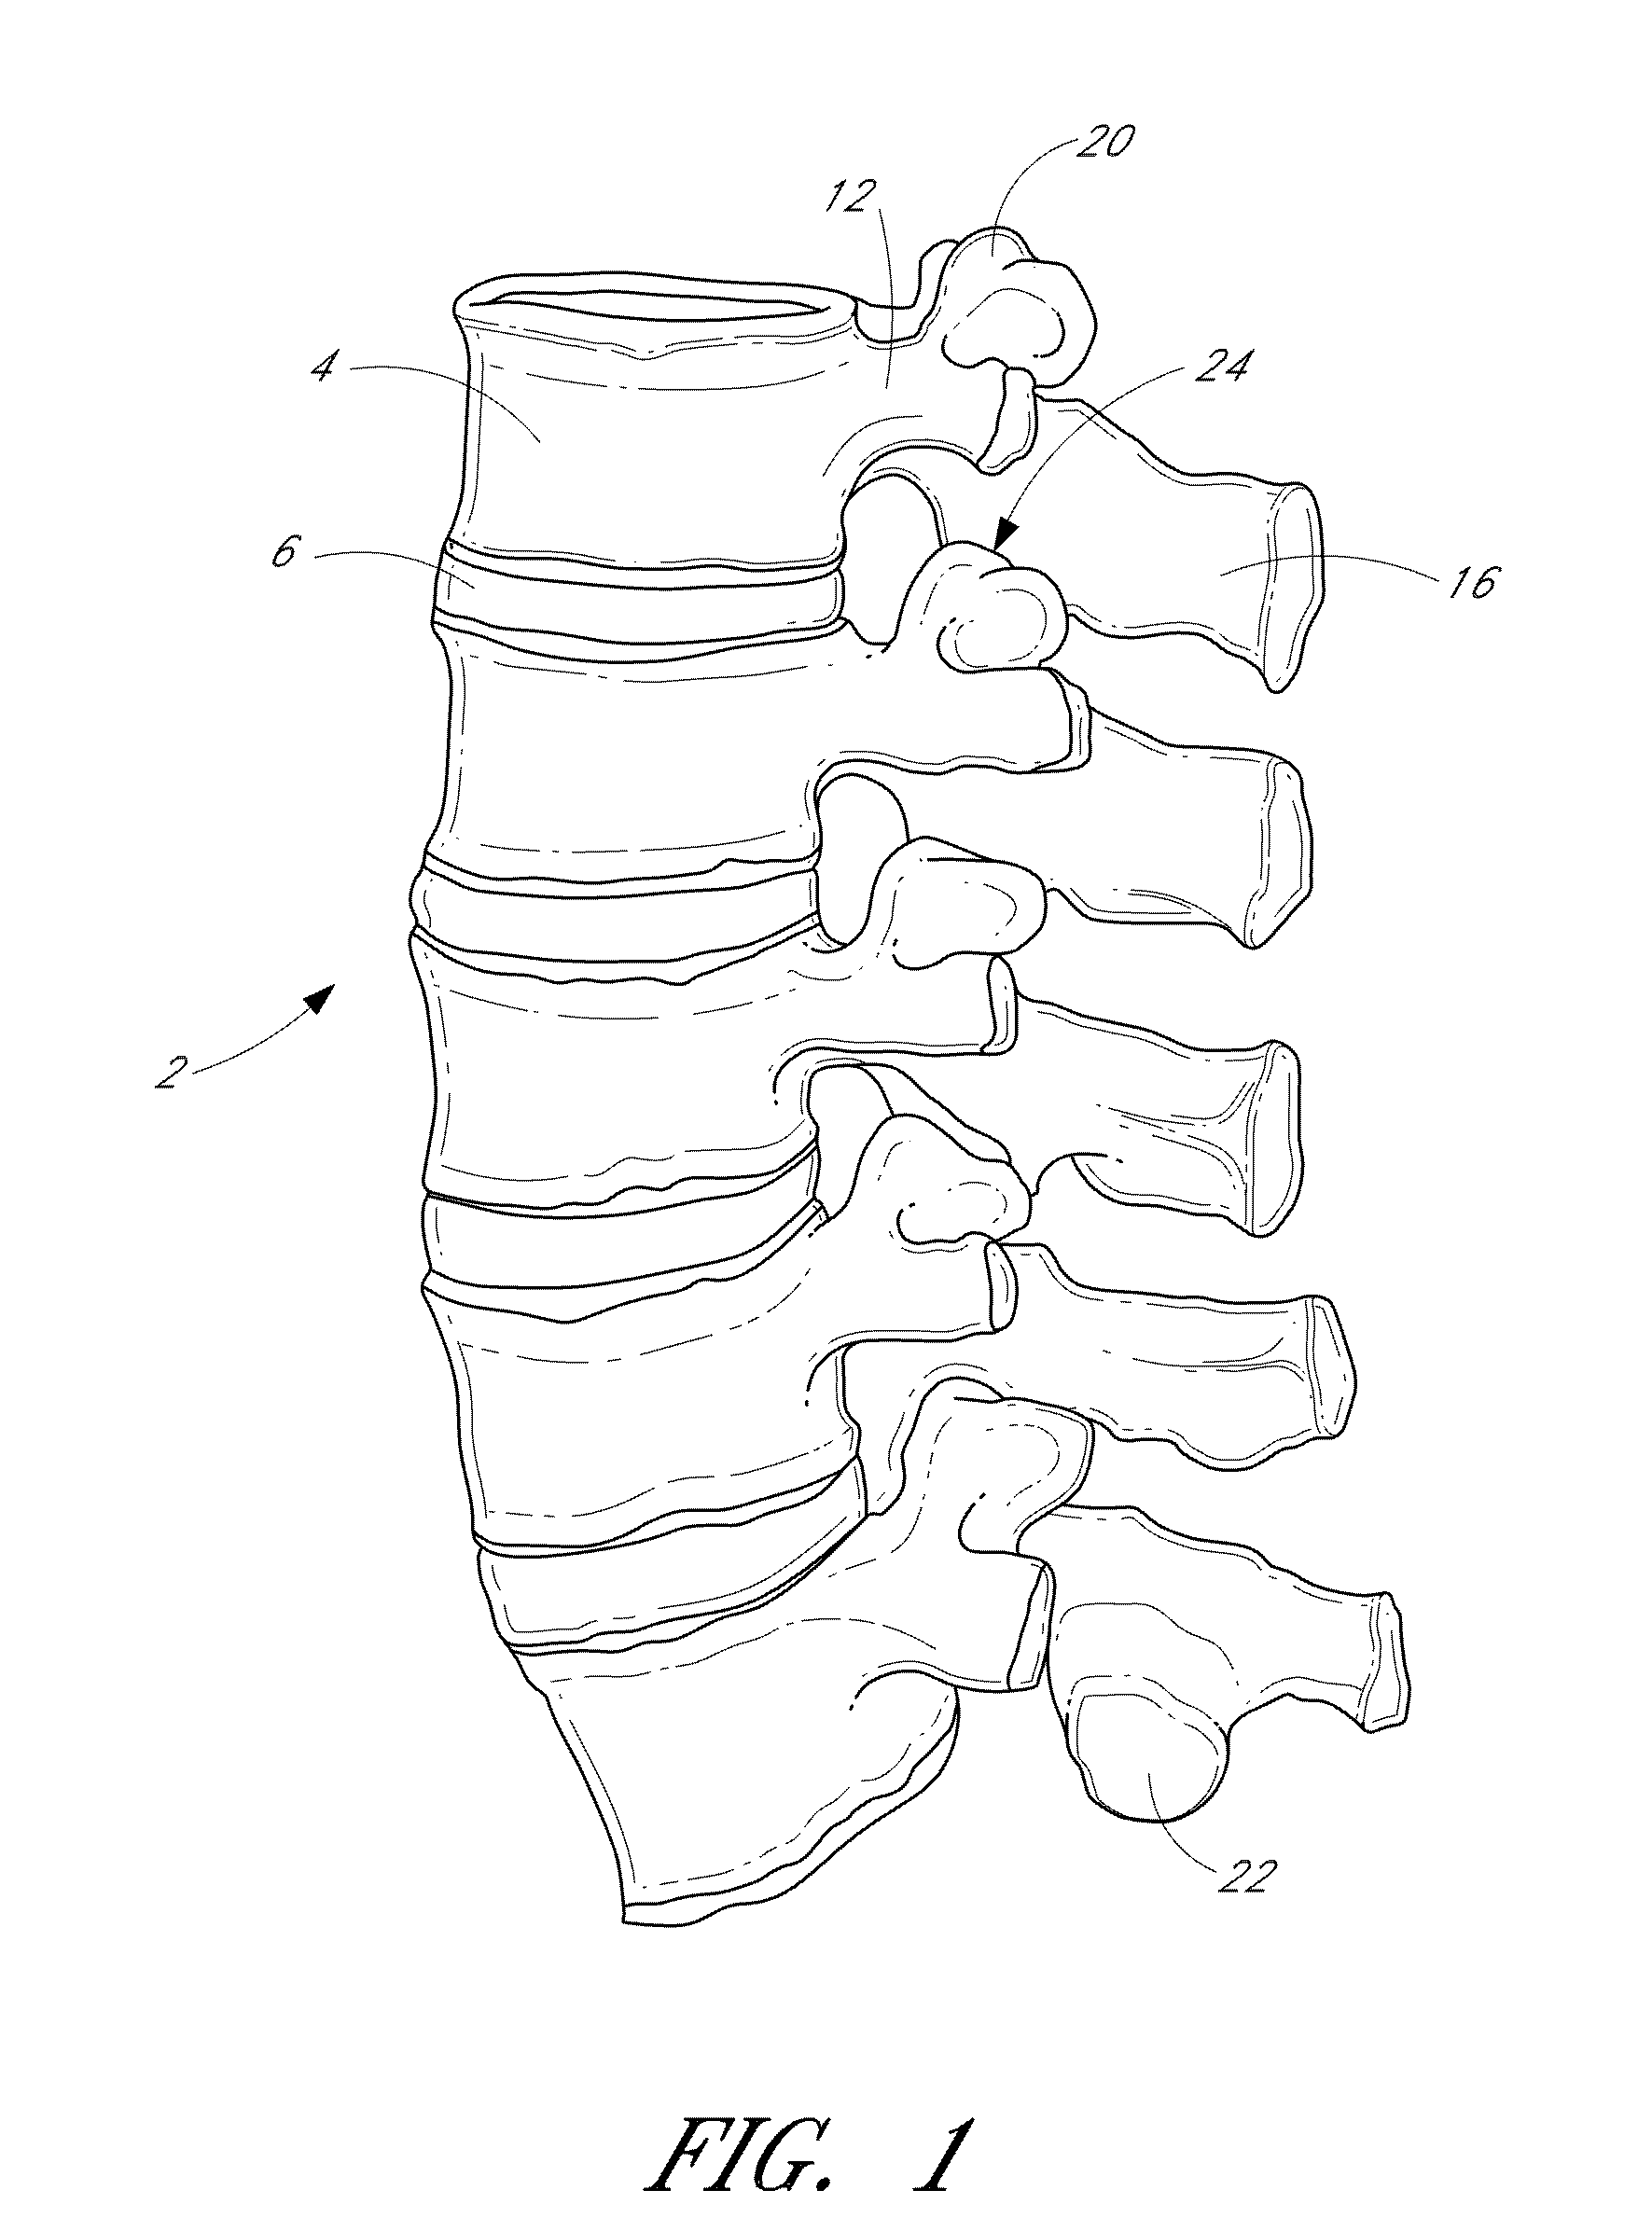 Flanged interbody fusion device